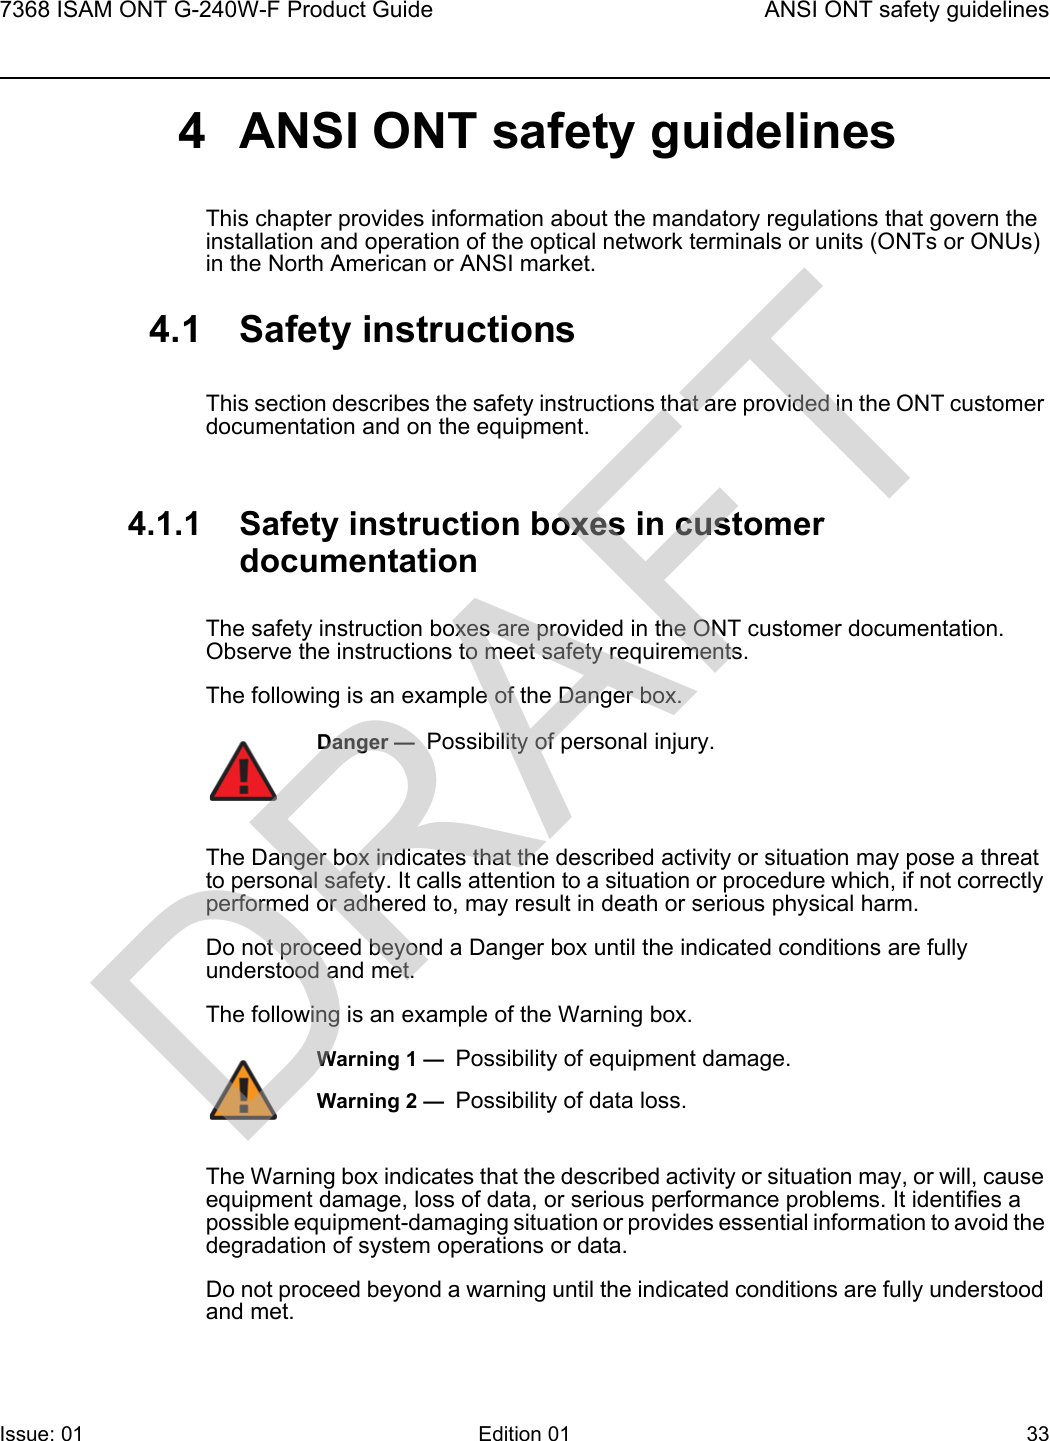 7368 ISAM ONT G-240W-F Product Guide ANSI ONT safety guidelinesIssue: 01 Edition 01 33 4 ANSI ONT safety guidelinesThis chapter provides information about the mandatory regulations that govern the installation and operation of the optical network terminals or units (ONTs or ONUs) in the North American or ANSI market.4.1 Safety instructionsThis section describes the safety instructions that are provided in the ONT customer documentation and on the equipment.4.1.1 Safety instruction boxes in customer documentationThe safety instruction boxes are provided in the ONT customer documentation. Observe the instructions to meet safety requirements.The following is an example of the Danger box.The Danger box indicates that the described activity or situation may pose a threat to personal safety. It calls attention to a situation or procedure which, if not correctly performed or adhered to, may result in death or serious physical harm. Do not proceed beyond a Danger box until the indicated conditions are fully understood and met.The following is an example of the Warning box.The Warning box indicates that the described activity or situation may, or will, cause equipment damage, loss of data, or serious performance problems. It identifies a possible equipment-damaging situation or provides essential information to avoid the degradation of system operations or data.Do not proceed beyond a warning until the indicated conditions are fully understood and met.Danger —  Possibility of personal injury. Warning 1 —  Possibility of equipment damage.Warning 2 —  Possibility of data loss.DRAFT